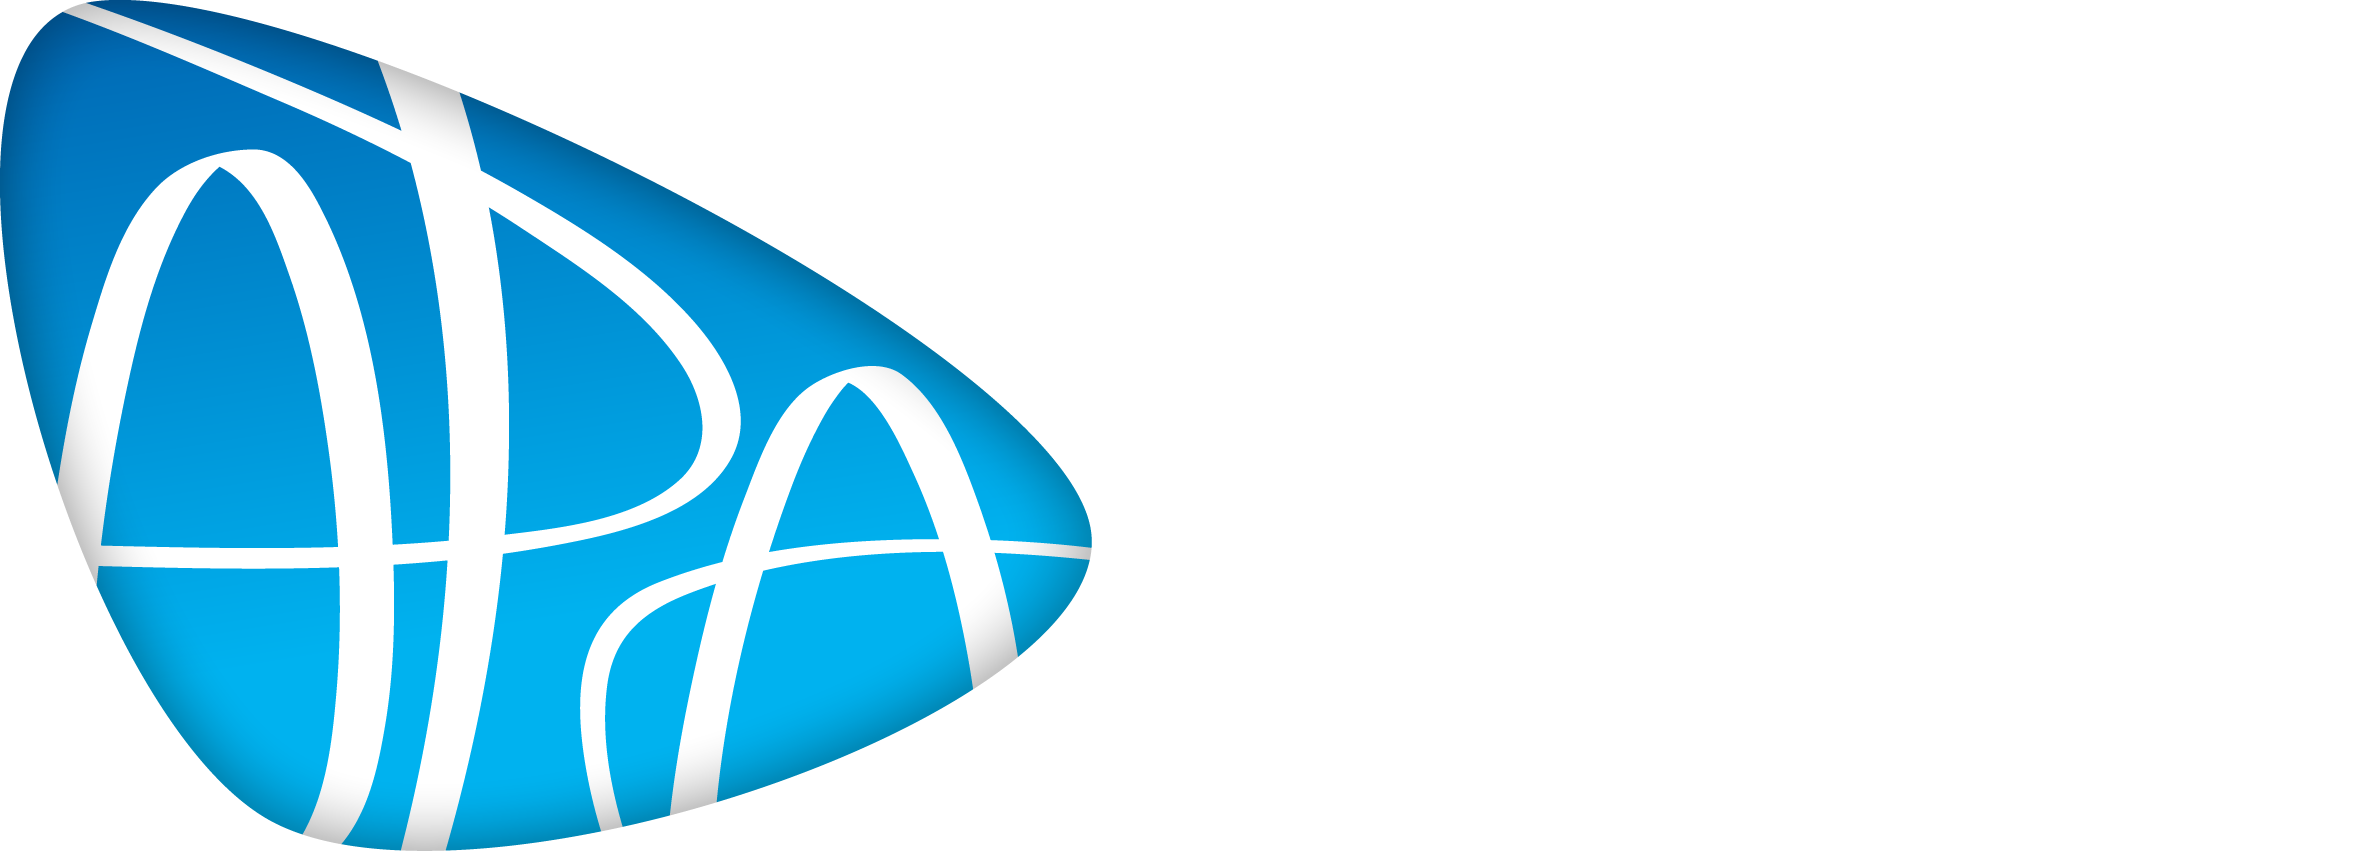 Australian Physiotherapy Association Home